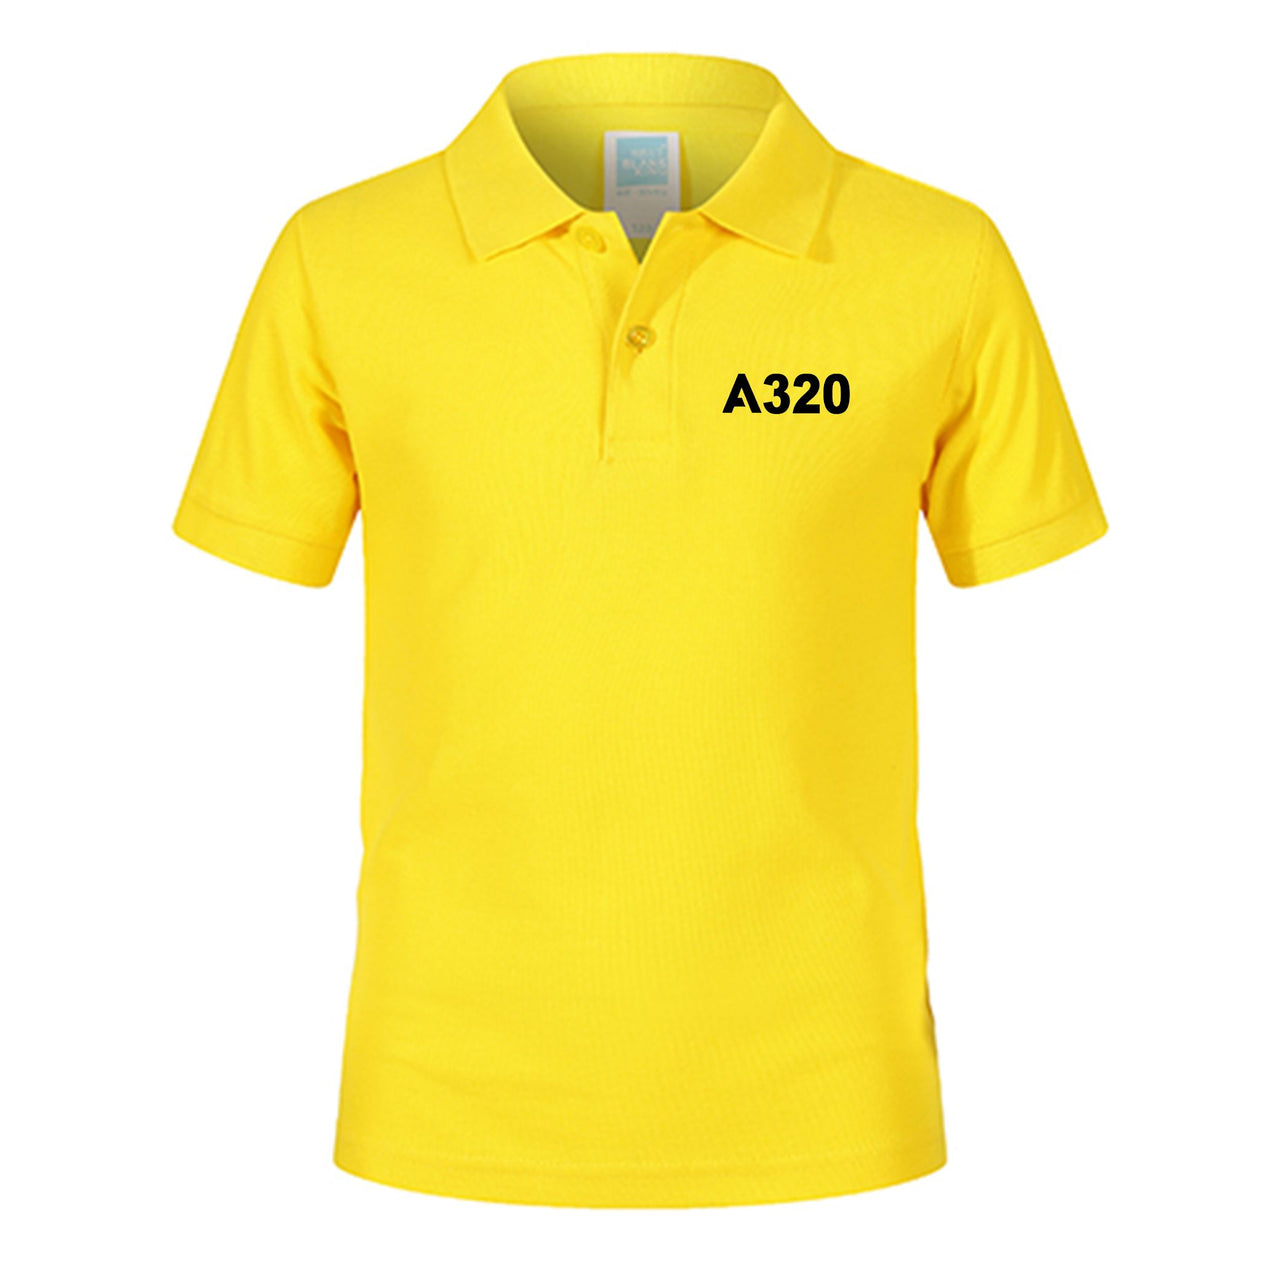 A320 Flat Text Designed Children Polo T-Shirts